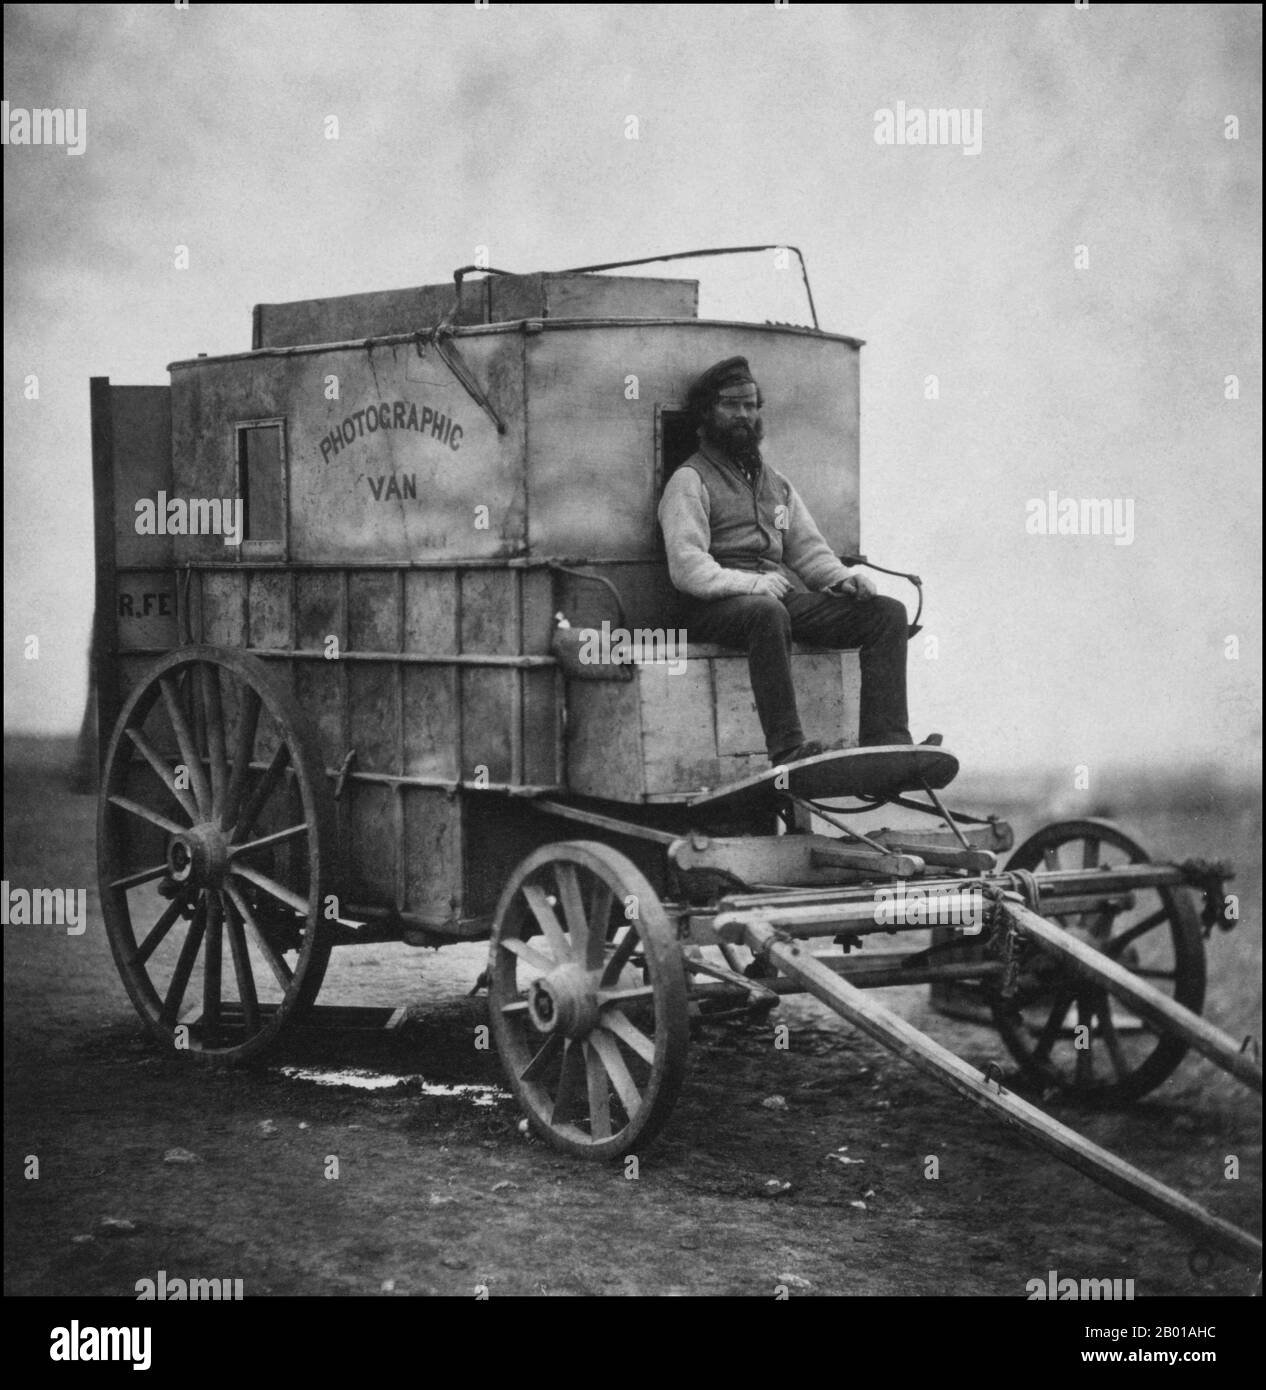 Great Britain/Russia: Roger Fenton's assistant Marcus Sparling seated on the horse-drawn 'Photographic Van' employed by Fenton during the Crimean War (1853-1856), 1855.  Roger Fenton (28 March 1819 – 8 August 1869) was a pioneering British photographer, one of the first war photographers. The Crimean War was one of the first wars to be documented extensively in written reports and photographs, notably by Roger Fenton and William Russell (for the Times). News correspondence reaching Britain from the Crimea was the first time the public were kept informed of the day-to-day realities of war. Stock Photo